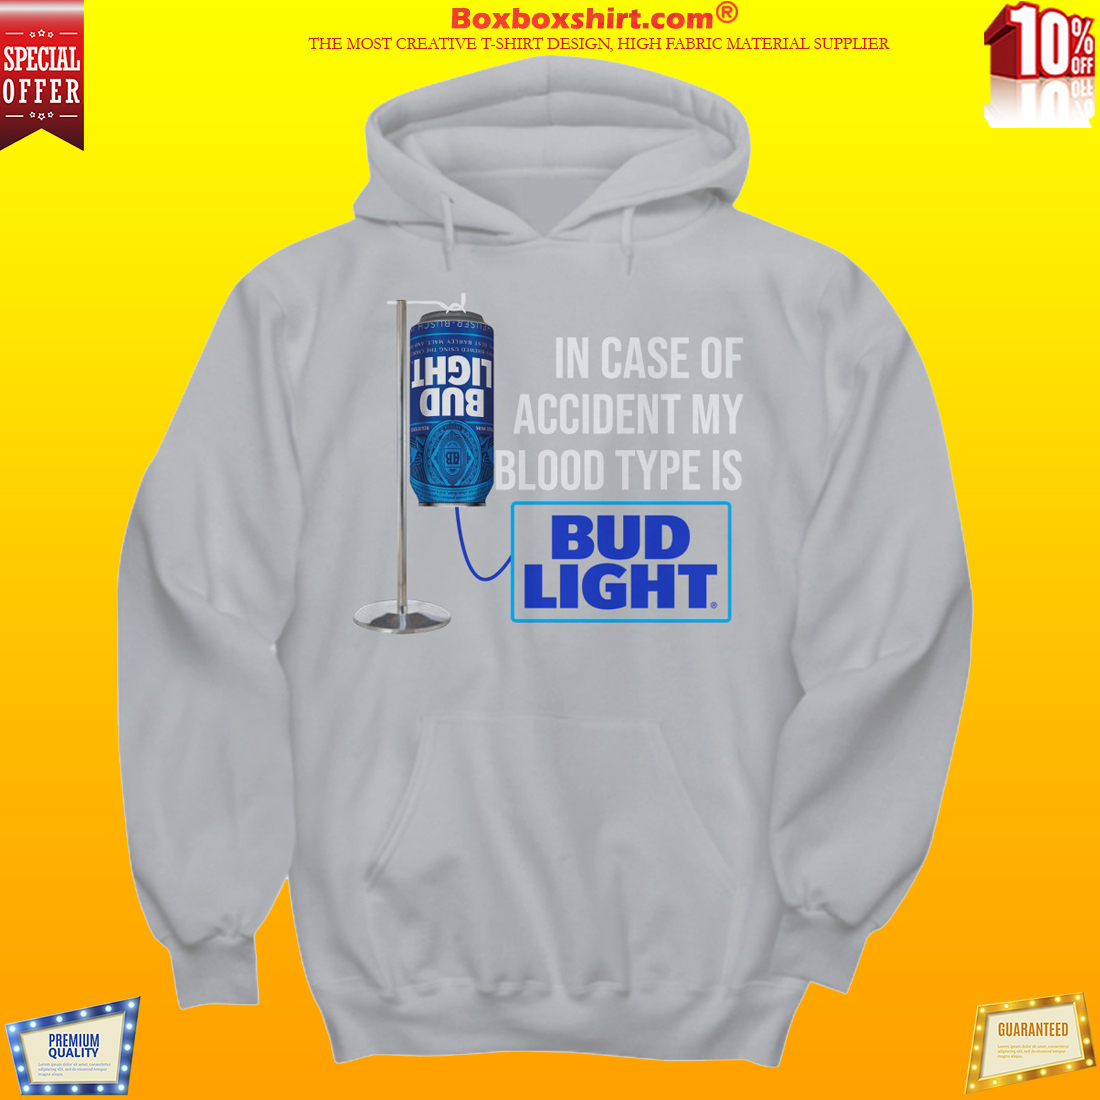 In case of accident my blood type is Bud Light t shirt and hoodie